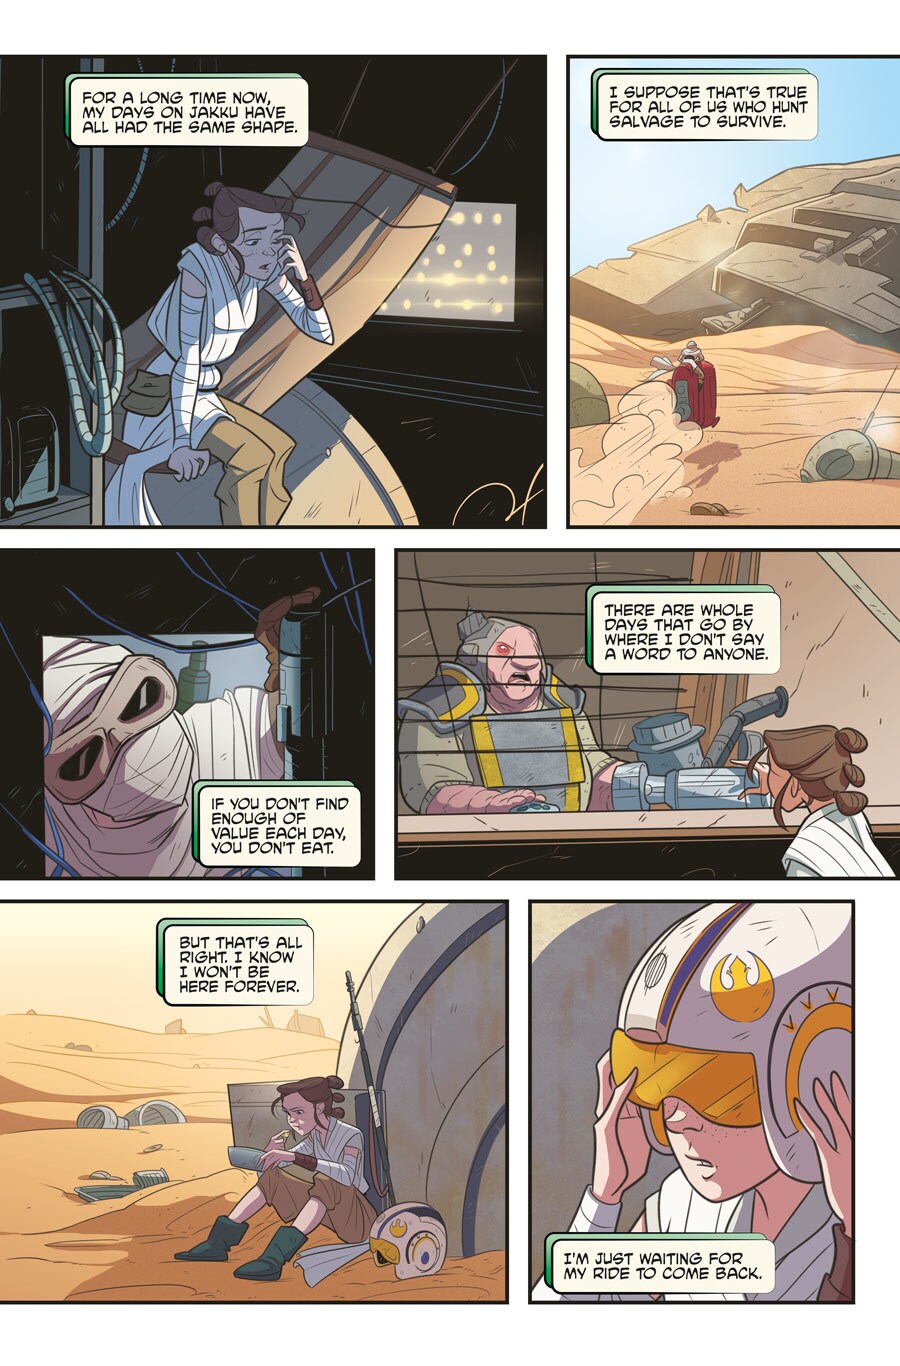 A page from the comic book Star Wars Forces of Destiny: Rey chronicles a day in her life as a scavenger on Jakku.